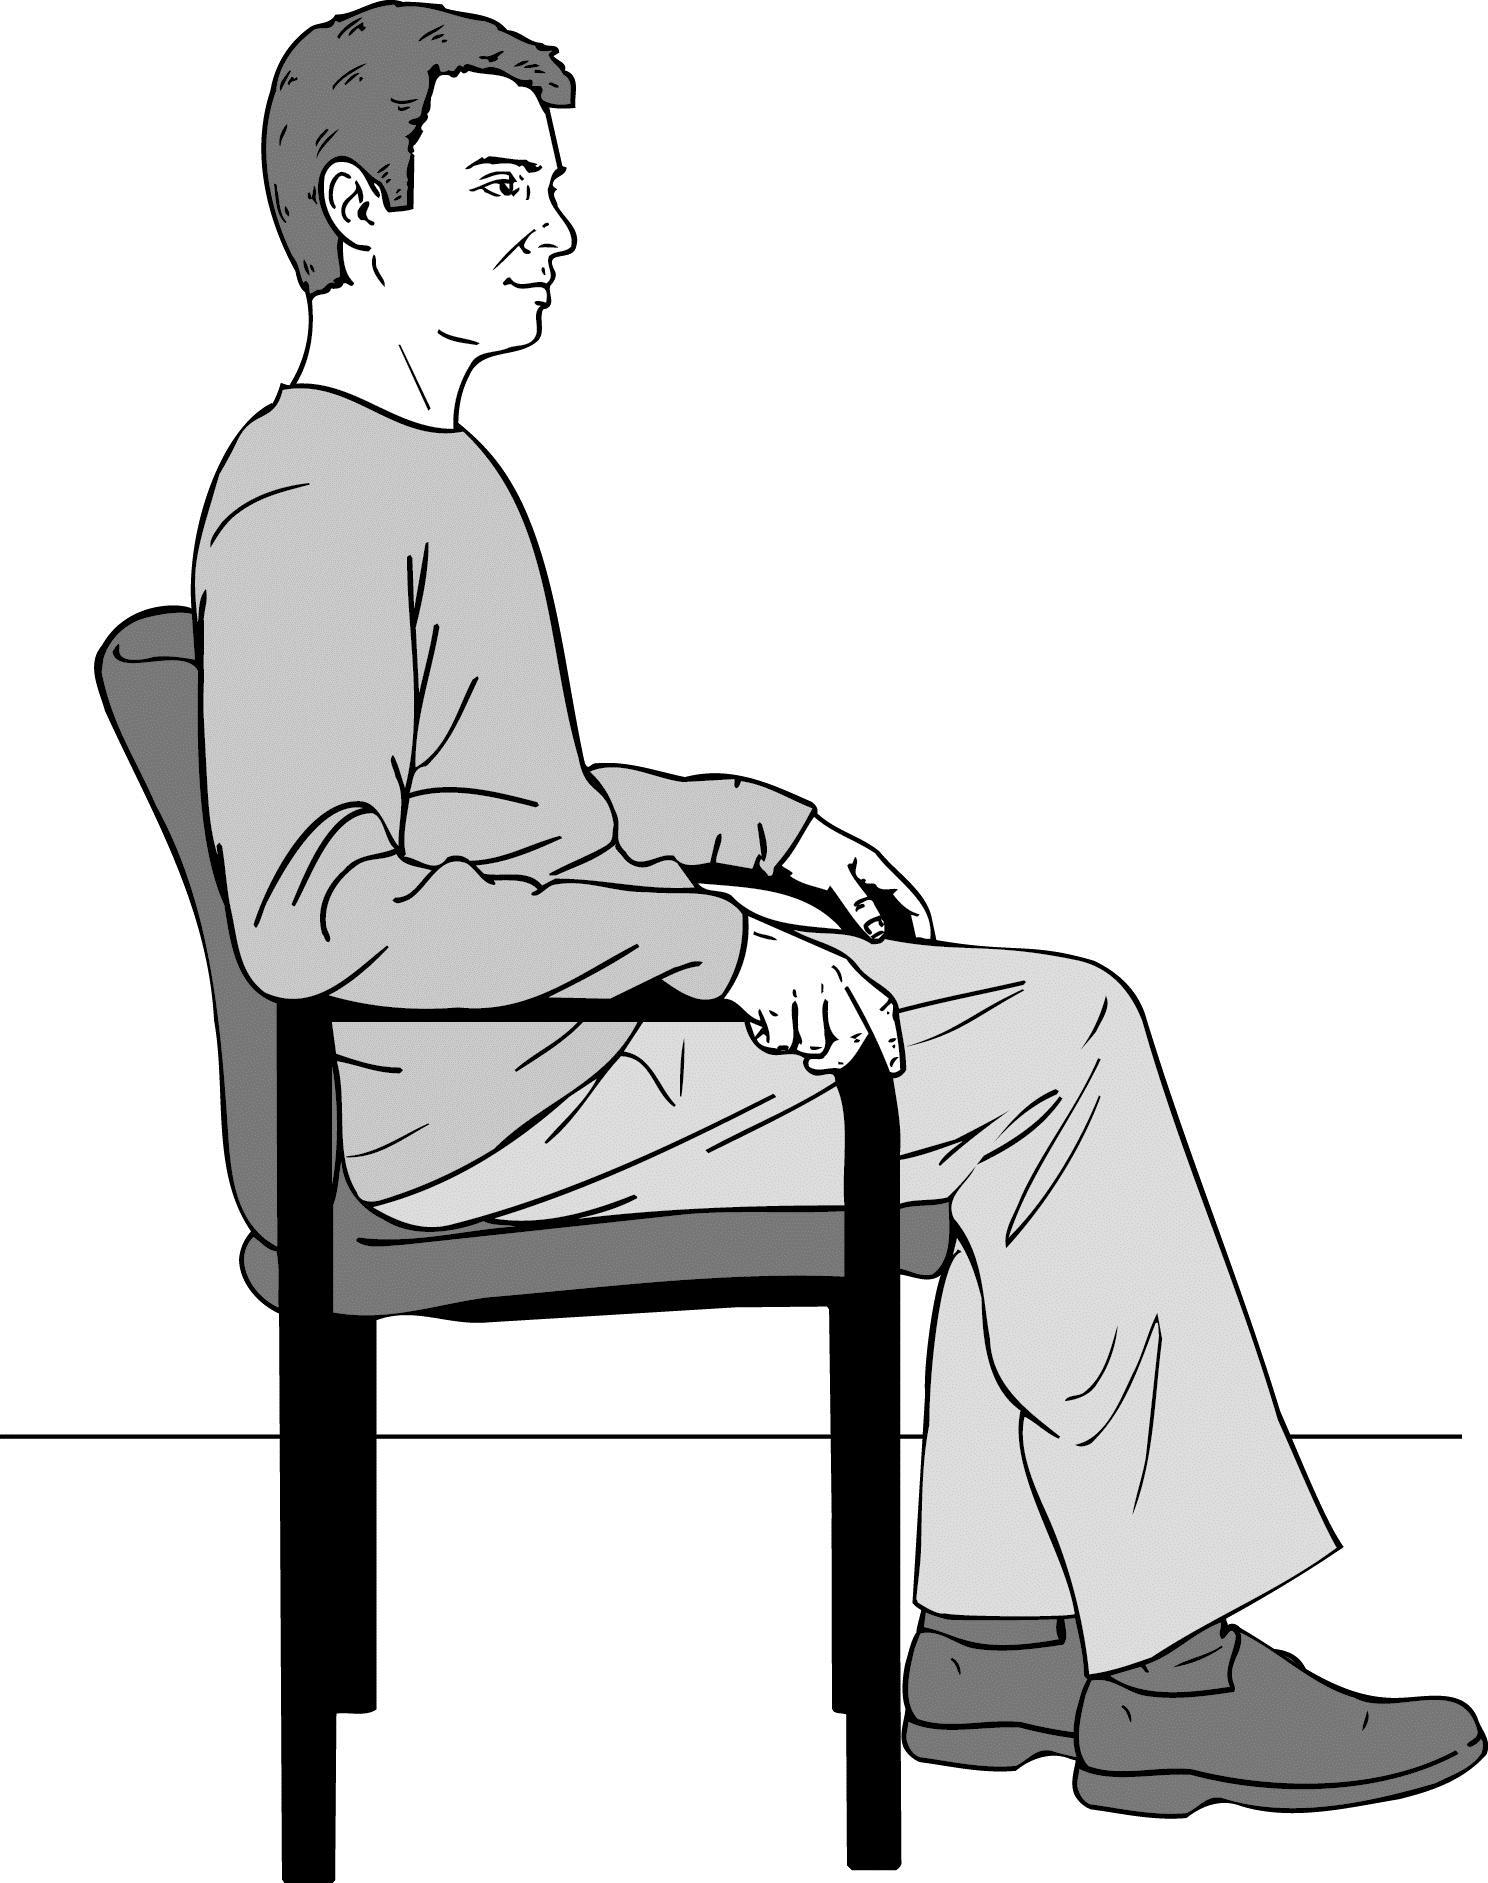 How to Sit/Stand After Knee Replacement | Cleveland Clinic